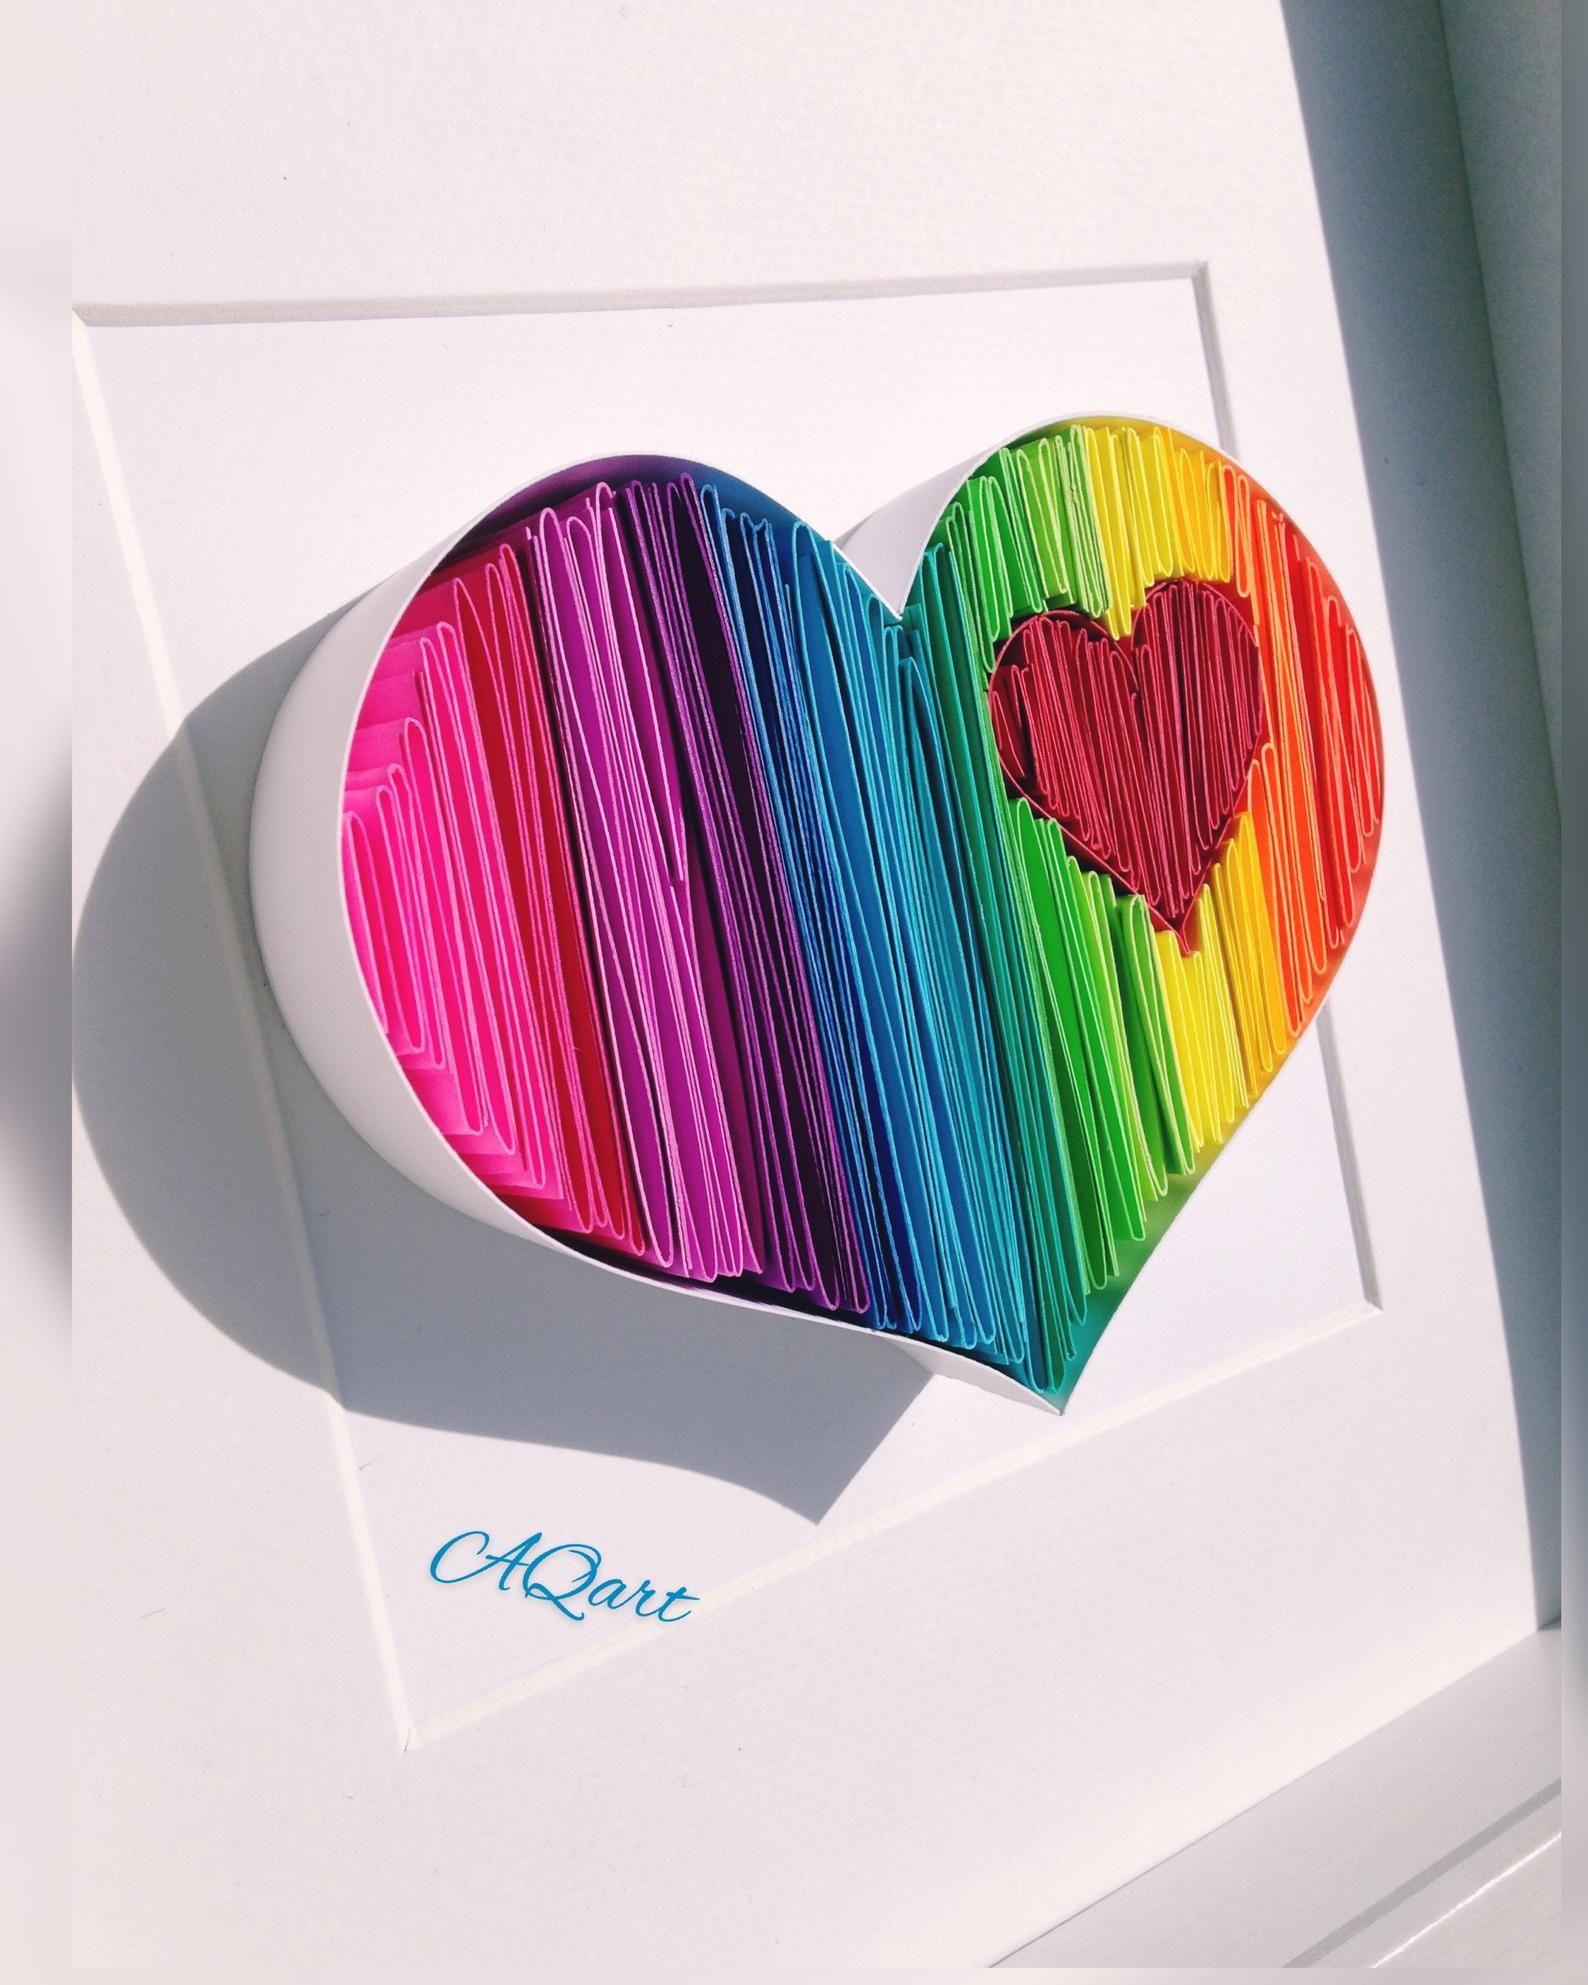 Rainbow Heart – Quilling Wall Paper Art Quilling Art Inside Most Recently Released Rainbow Wall Art (View 3 of 20)